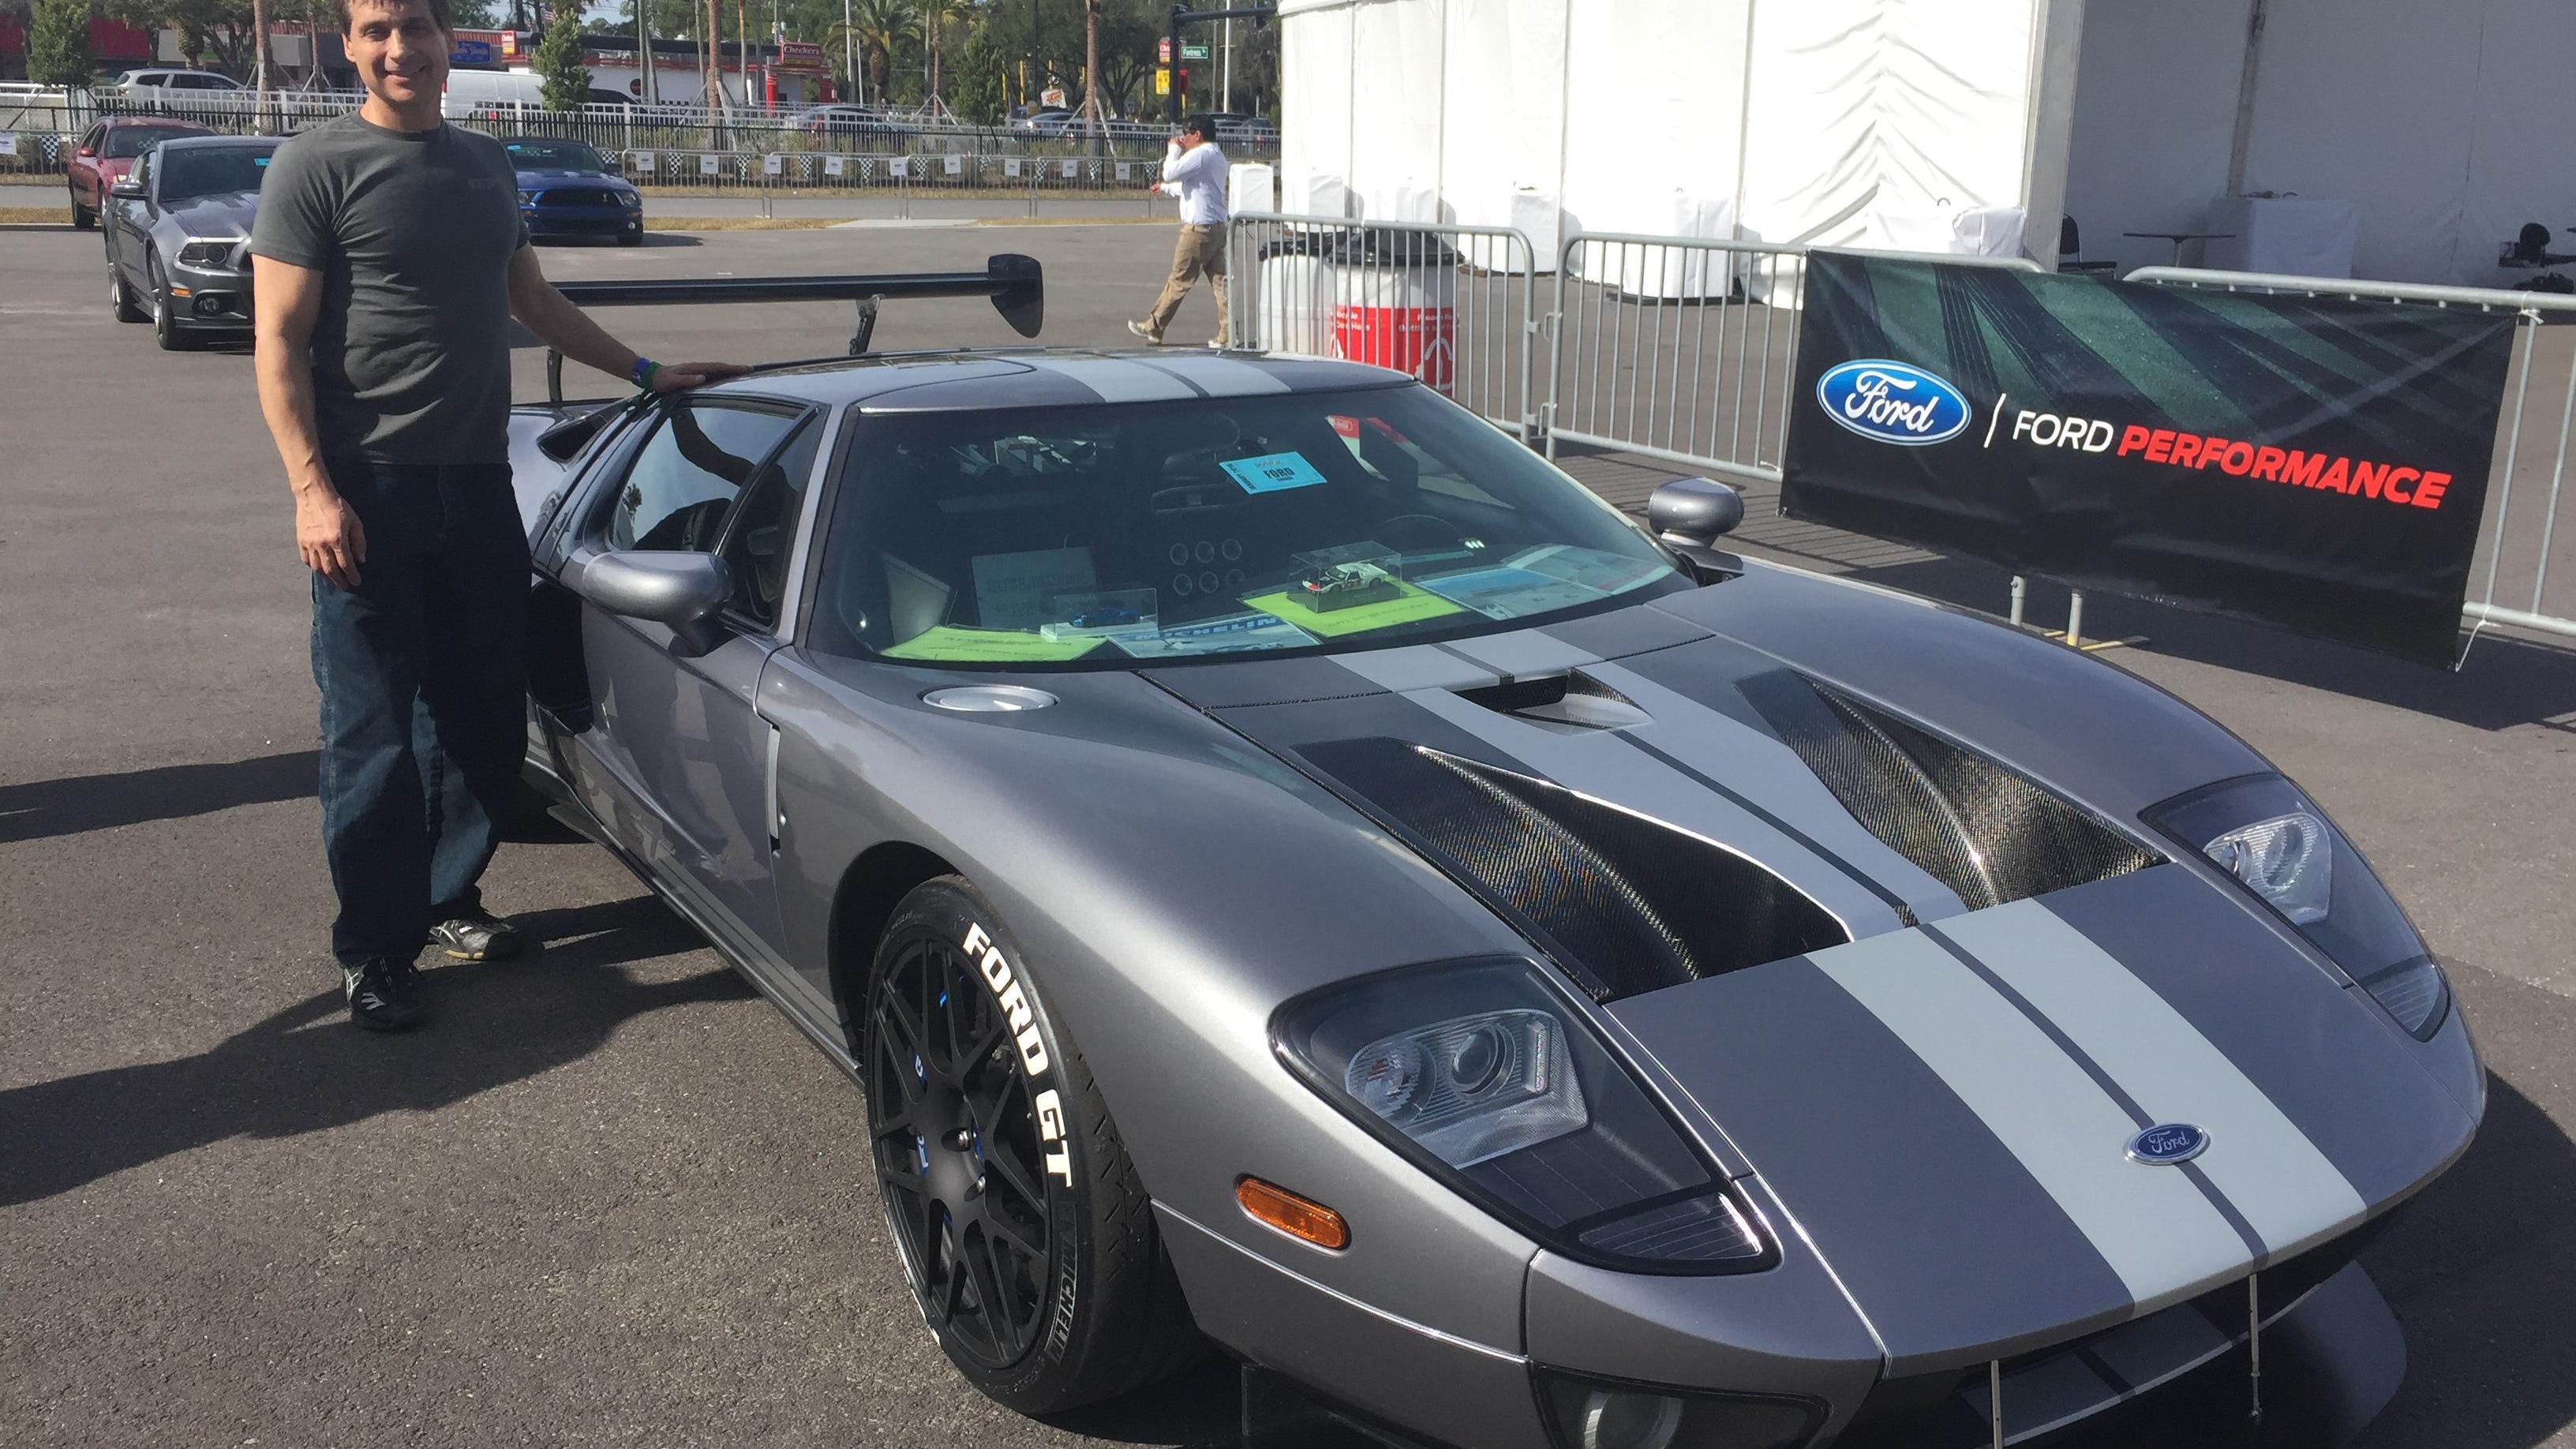 Brian Stormer, 55, stands with his 2006 Ford GT outside the Daytona International Speedway on Saturday. He hopes to be among first 250 owners of the new GT.